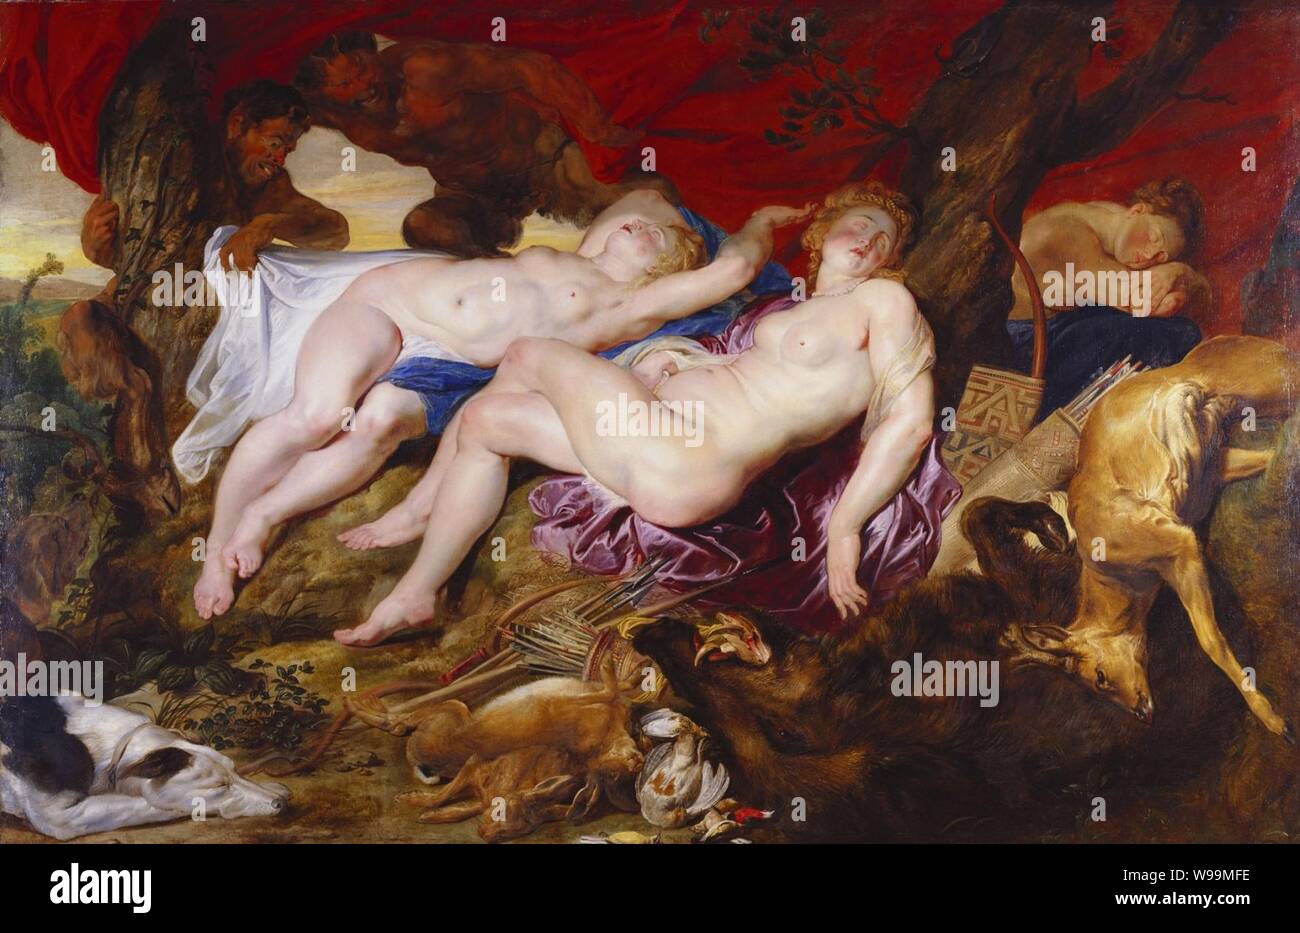 Diana and her nymphs spied upon by satyrs, by Peter Paul Rubens. Stock Photo